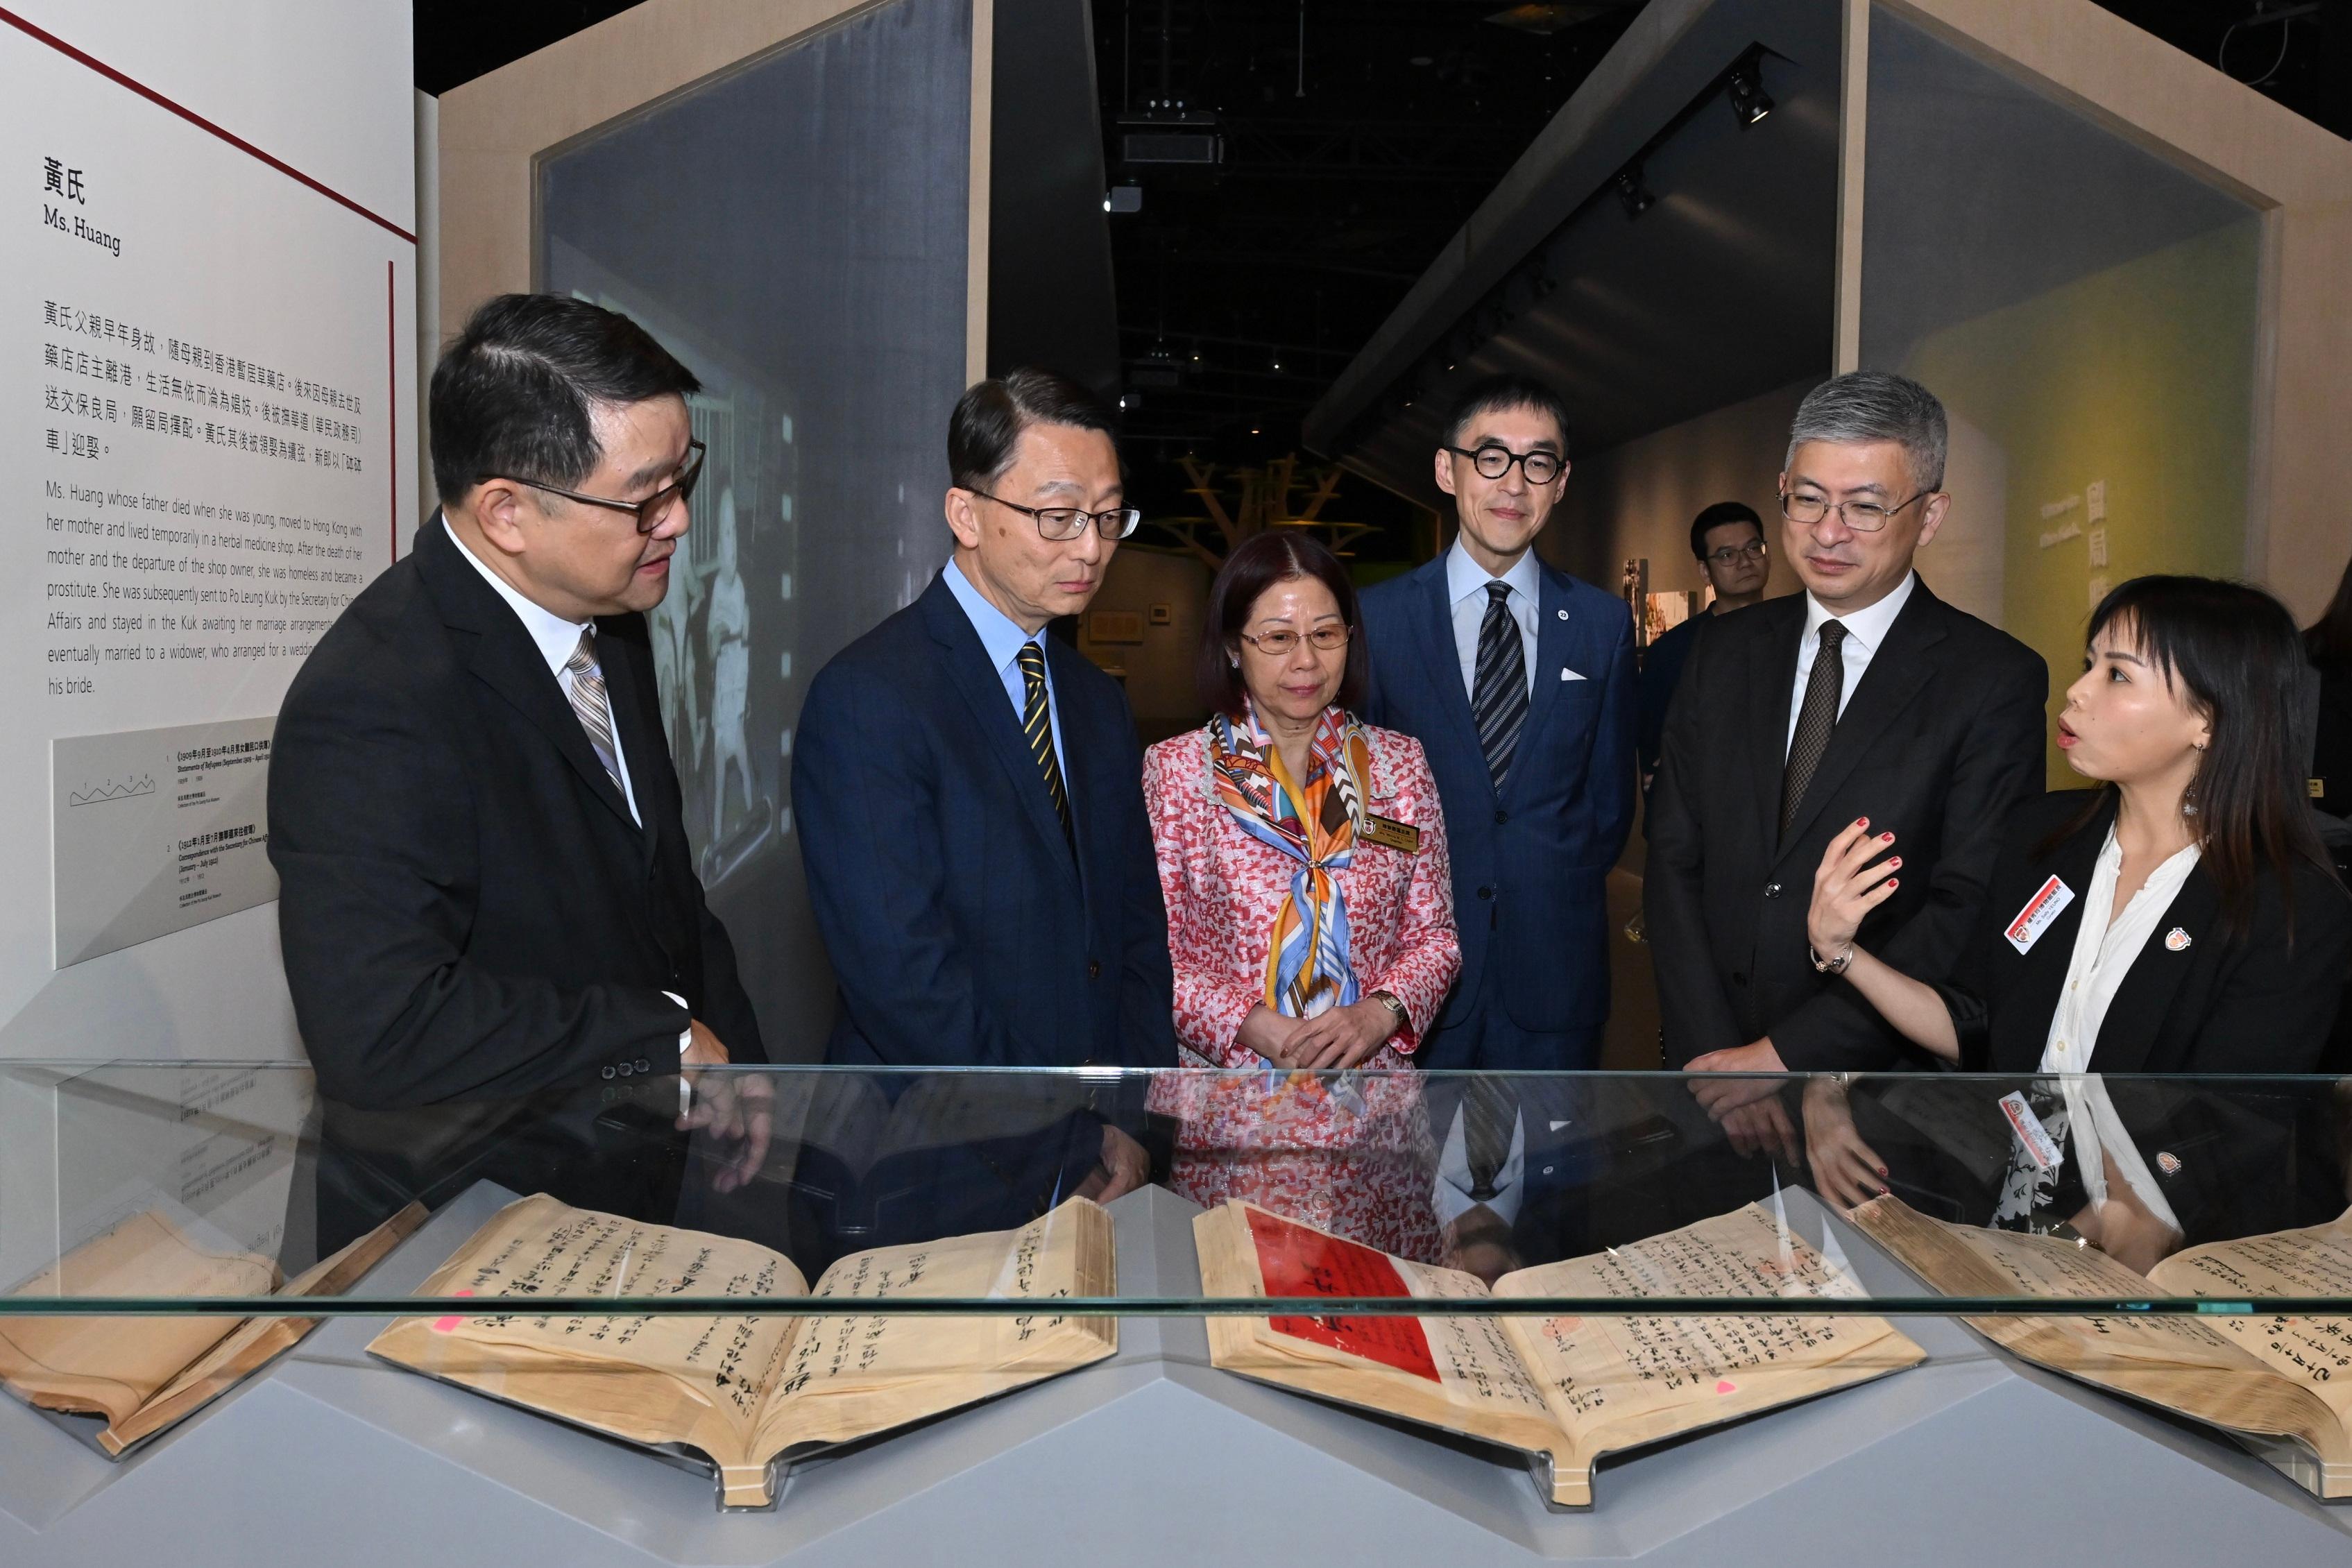 The opening ceremony for the exhibition "Po Leung Kuk 145th Anniversary: Building Charity with Benevolence" was held today (October 17) at the Hong Kong Heritage Museum (HKHM). Photo shows the Curator of the Po Leung Kuk Museum, Ms Sally Yeung (first right), introducing the exhibition to officiating guests (from left), the Museum Director of the HKHM, Mr Brian Lam; the Director of Leisure and Cultural Services, Mr Vincent Liu; the Chairman of Po Leung Kuk, Mrs Winnie Chan; the Chairman of the Museum Advisory Committee, Professor Douglas So, and the Under Secretary for Culture, Sports and Tourism, Mr Raistlin Lau.